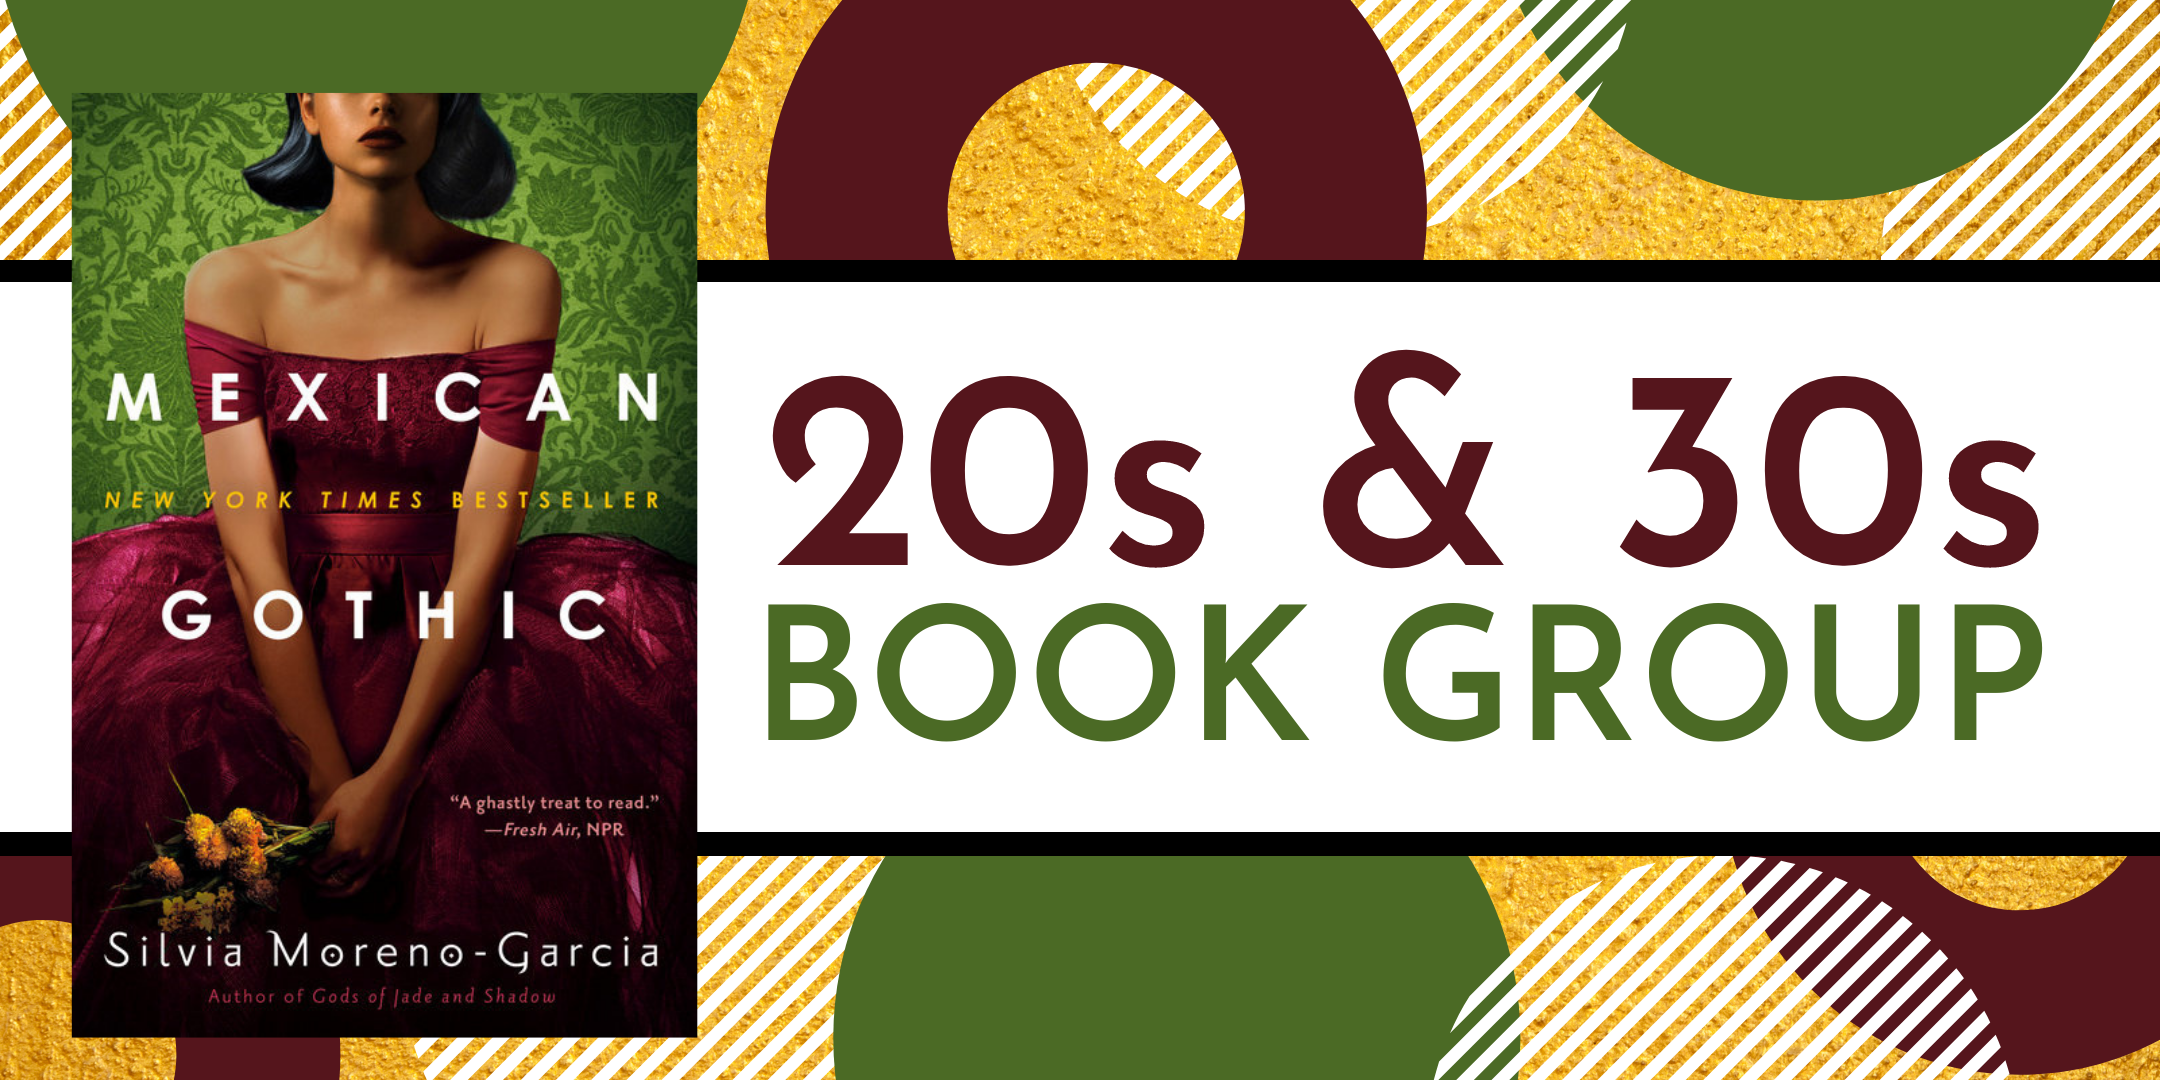 After Dinner Book Club: Mexican Gothic, Events